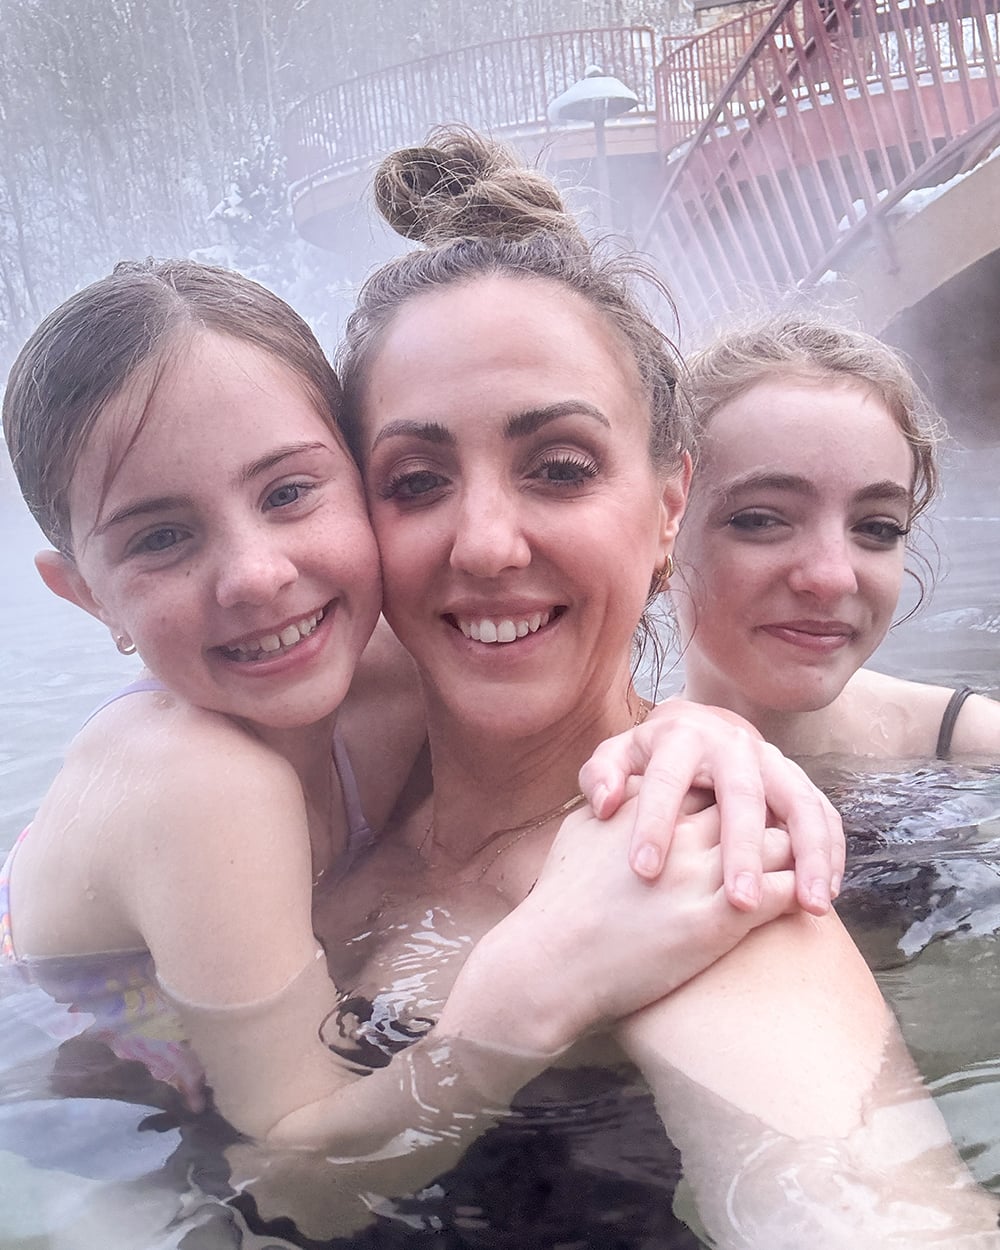 Steamboat Springs Things to do - Old Town Hot Springs